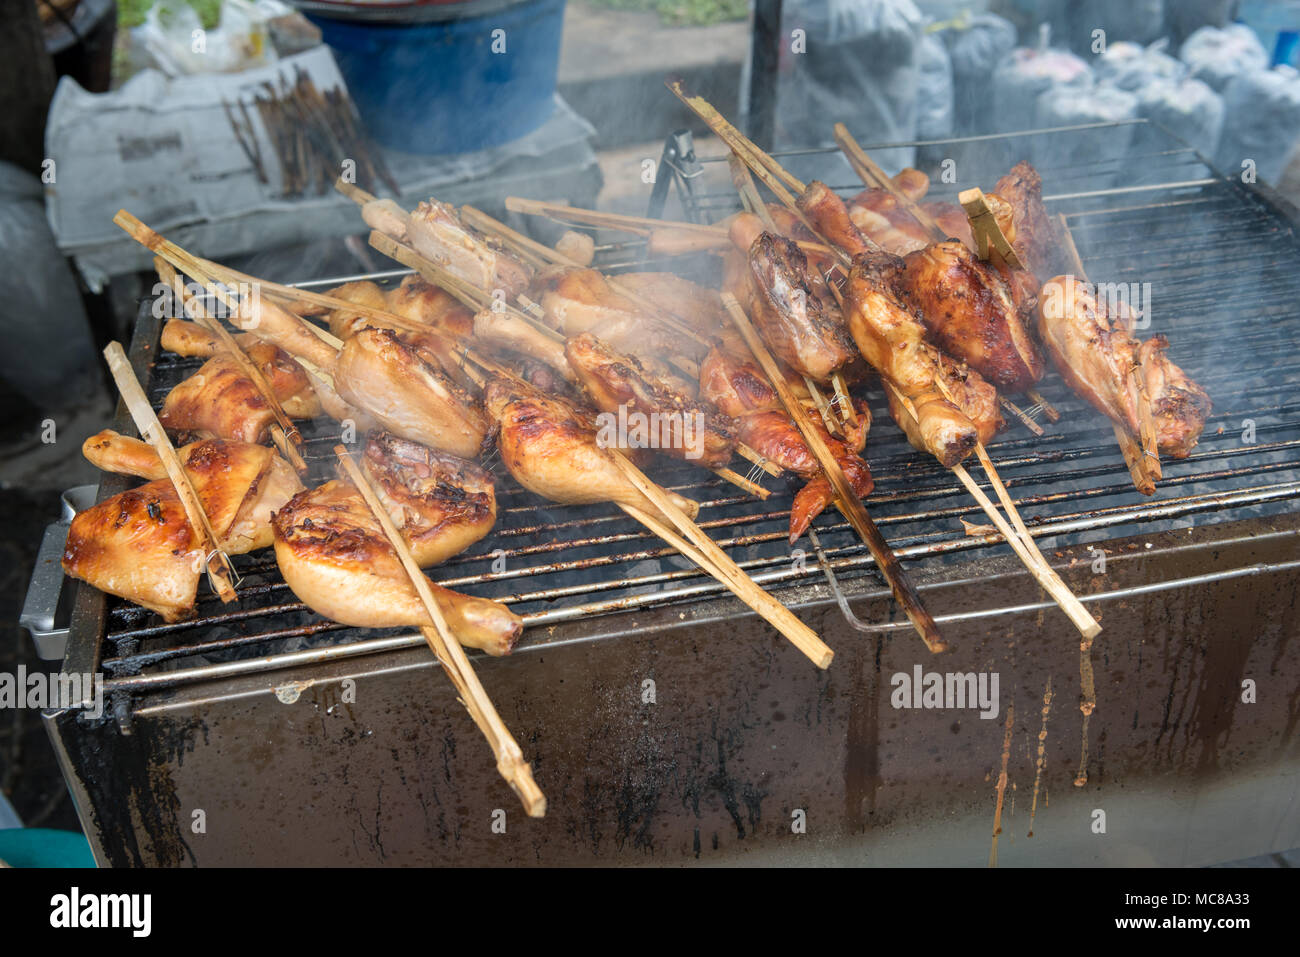 Chicken wing street food cooking on a charcoal grill in Bangkok ...